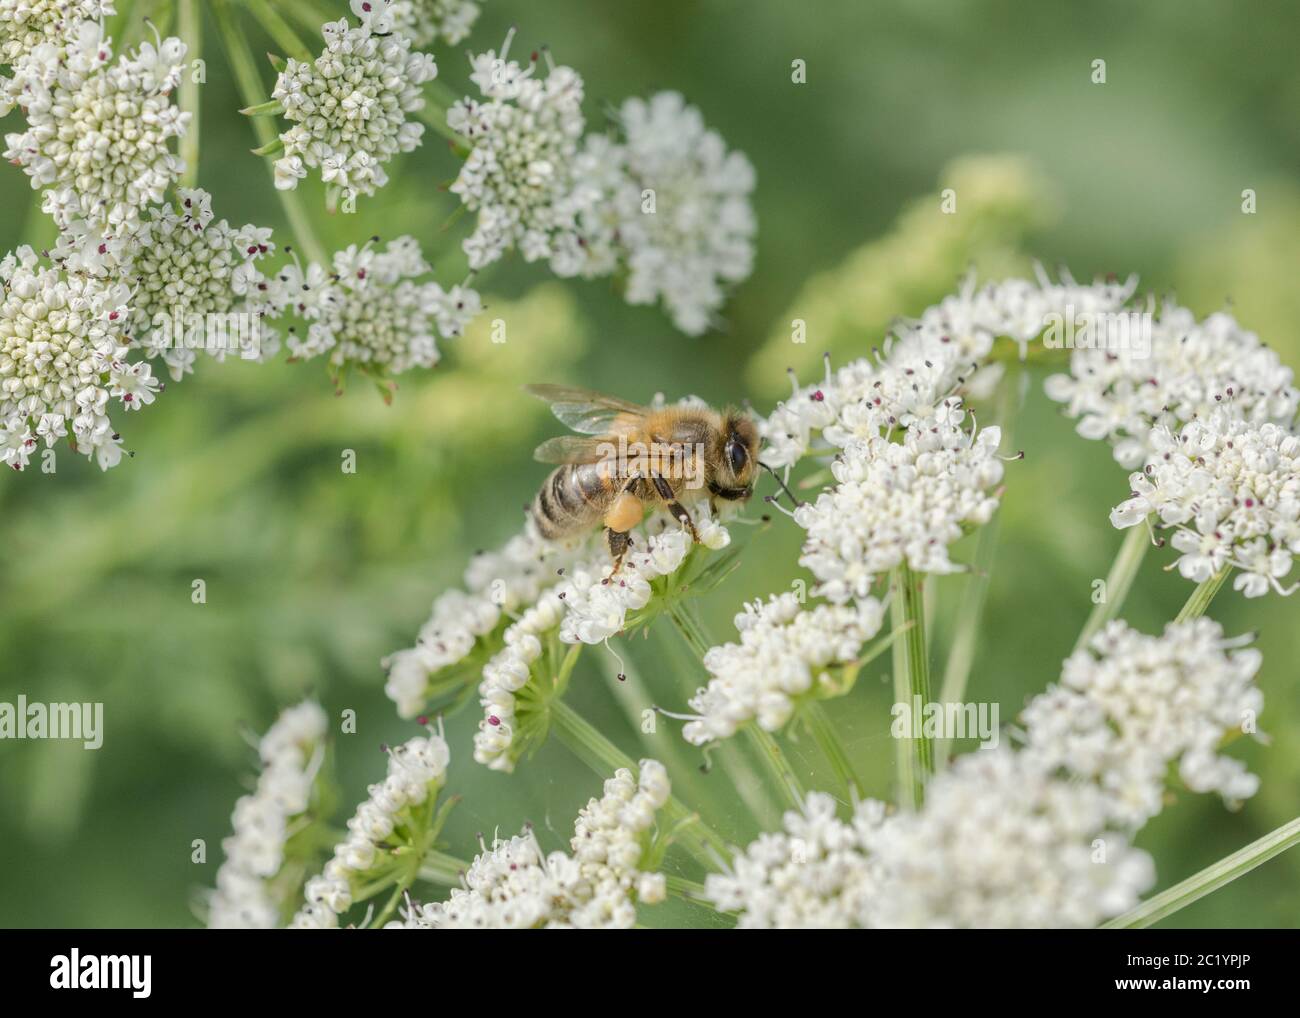 Worker Honeybee / Apis mellifera foraging and collecting pollen among flowers of Water Dropwort / Oenanthe crocata in summer sunshine. Insects UK. Stock Photo